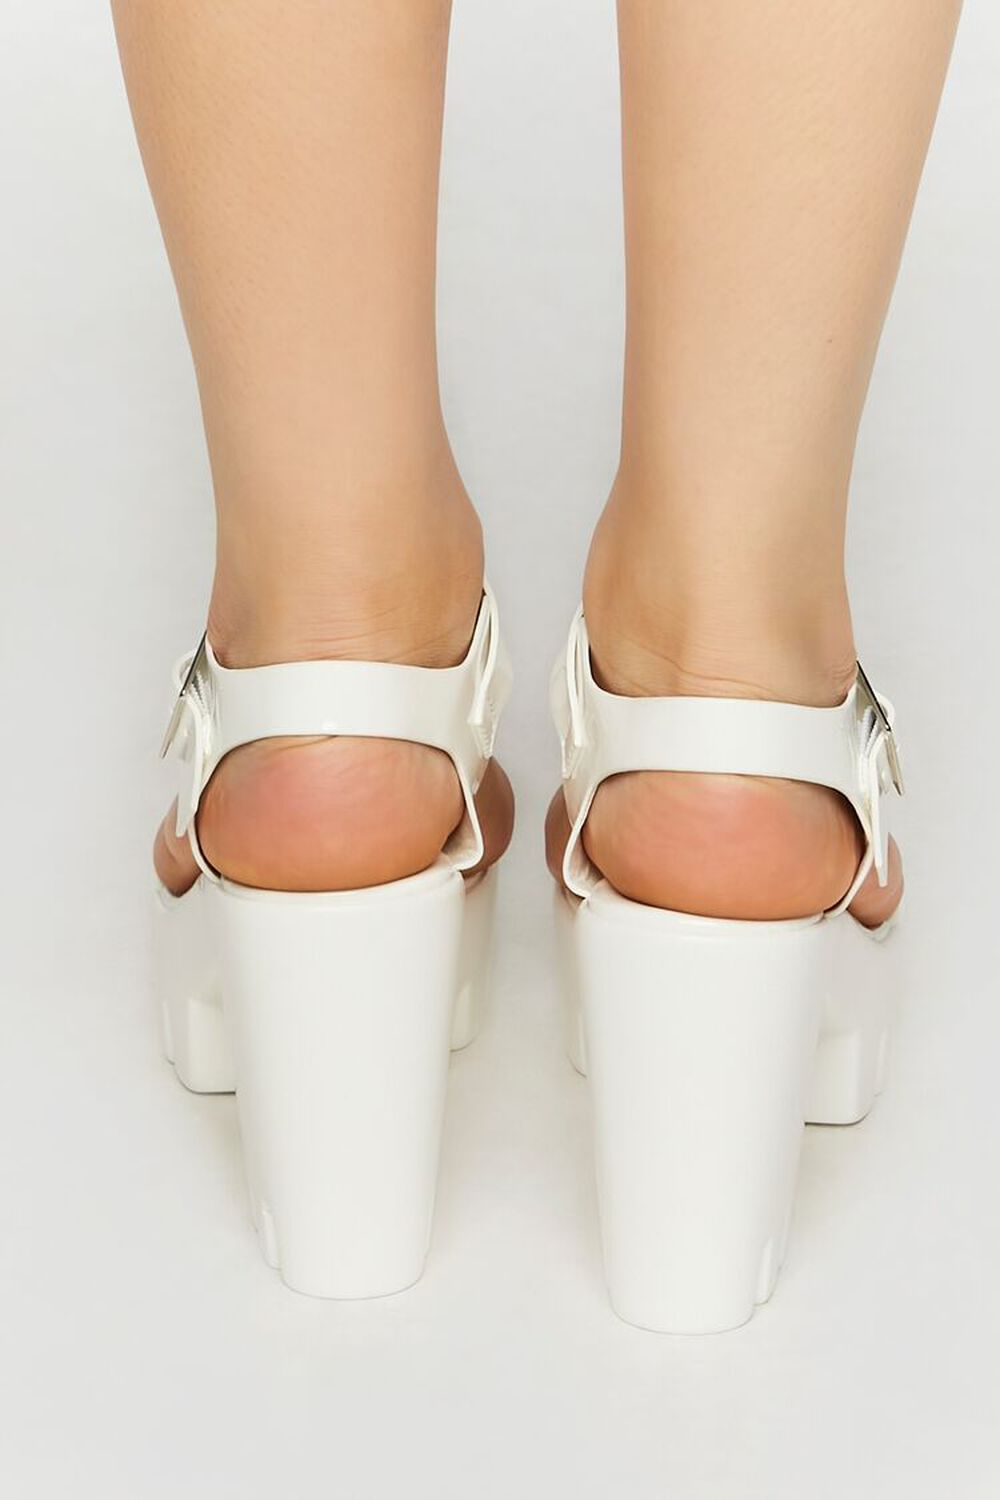 WHITE Faux Patent Leather Open-Toe Lug Heels, image 3